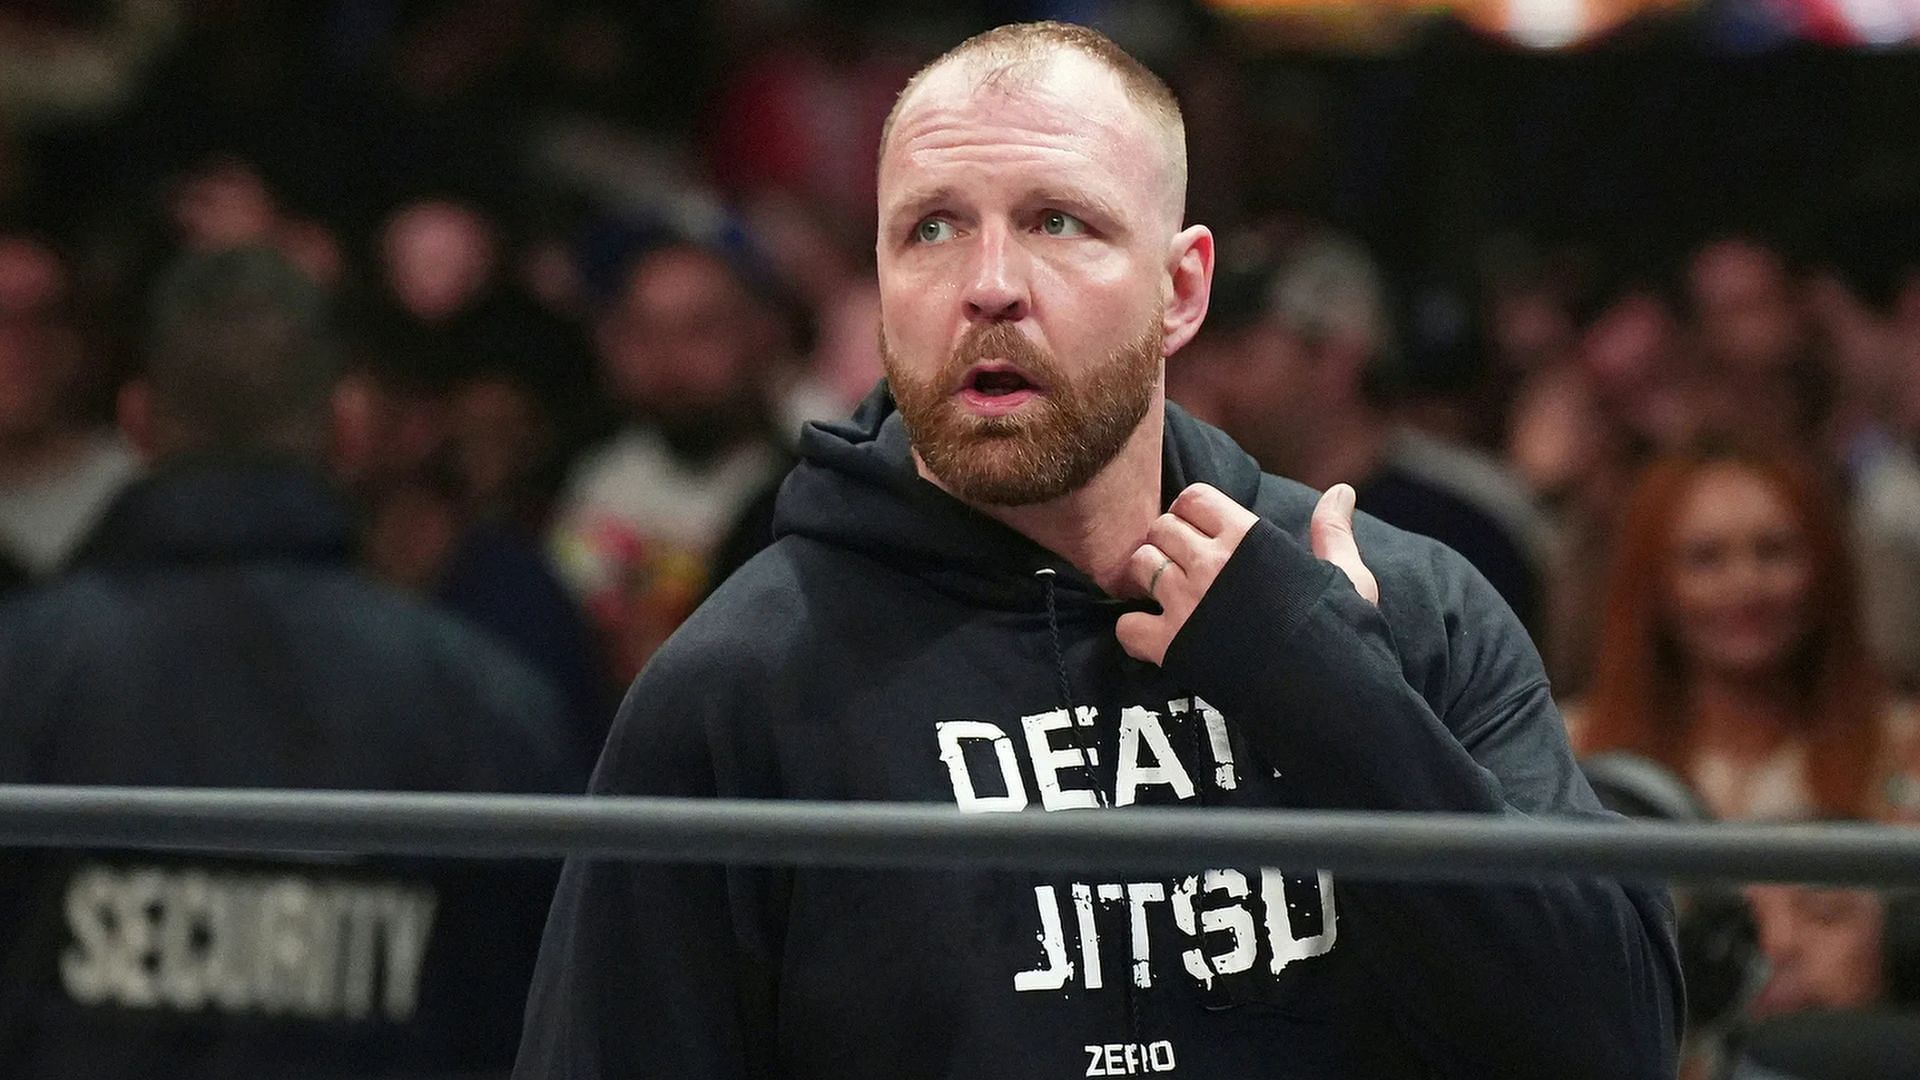 Could this be the star to decimate Jon Moxley in AEW?